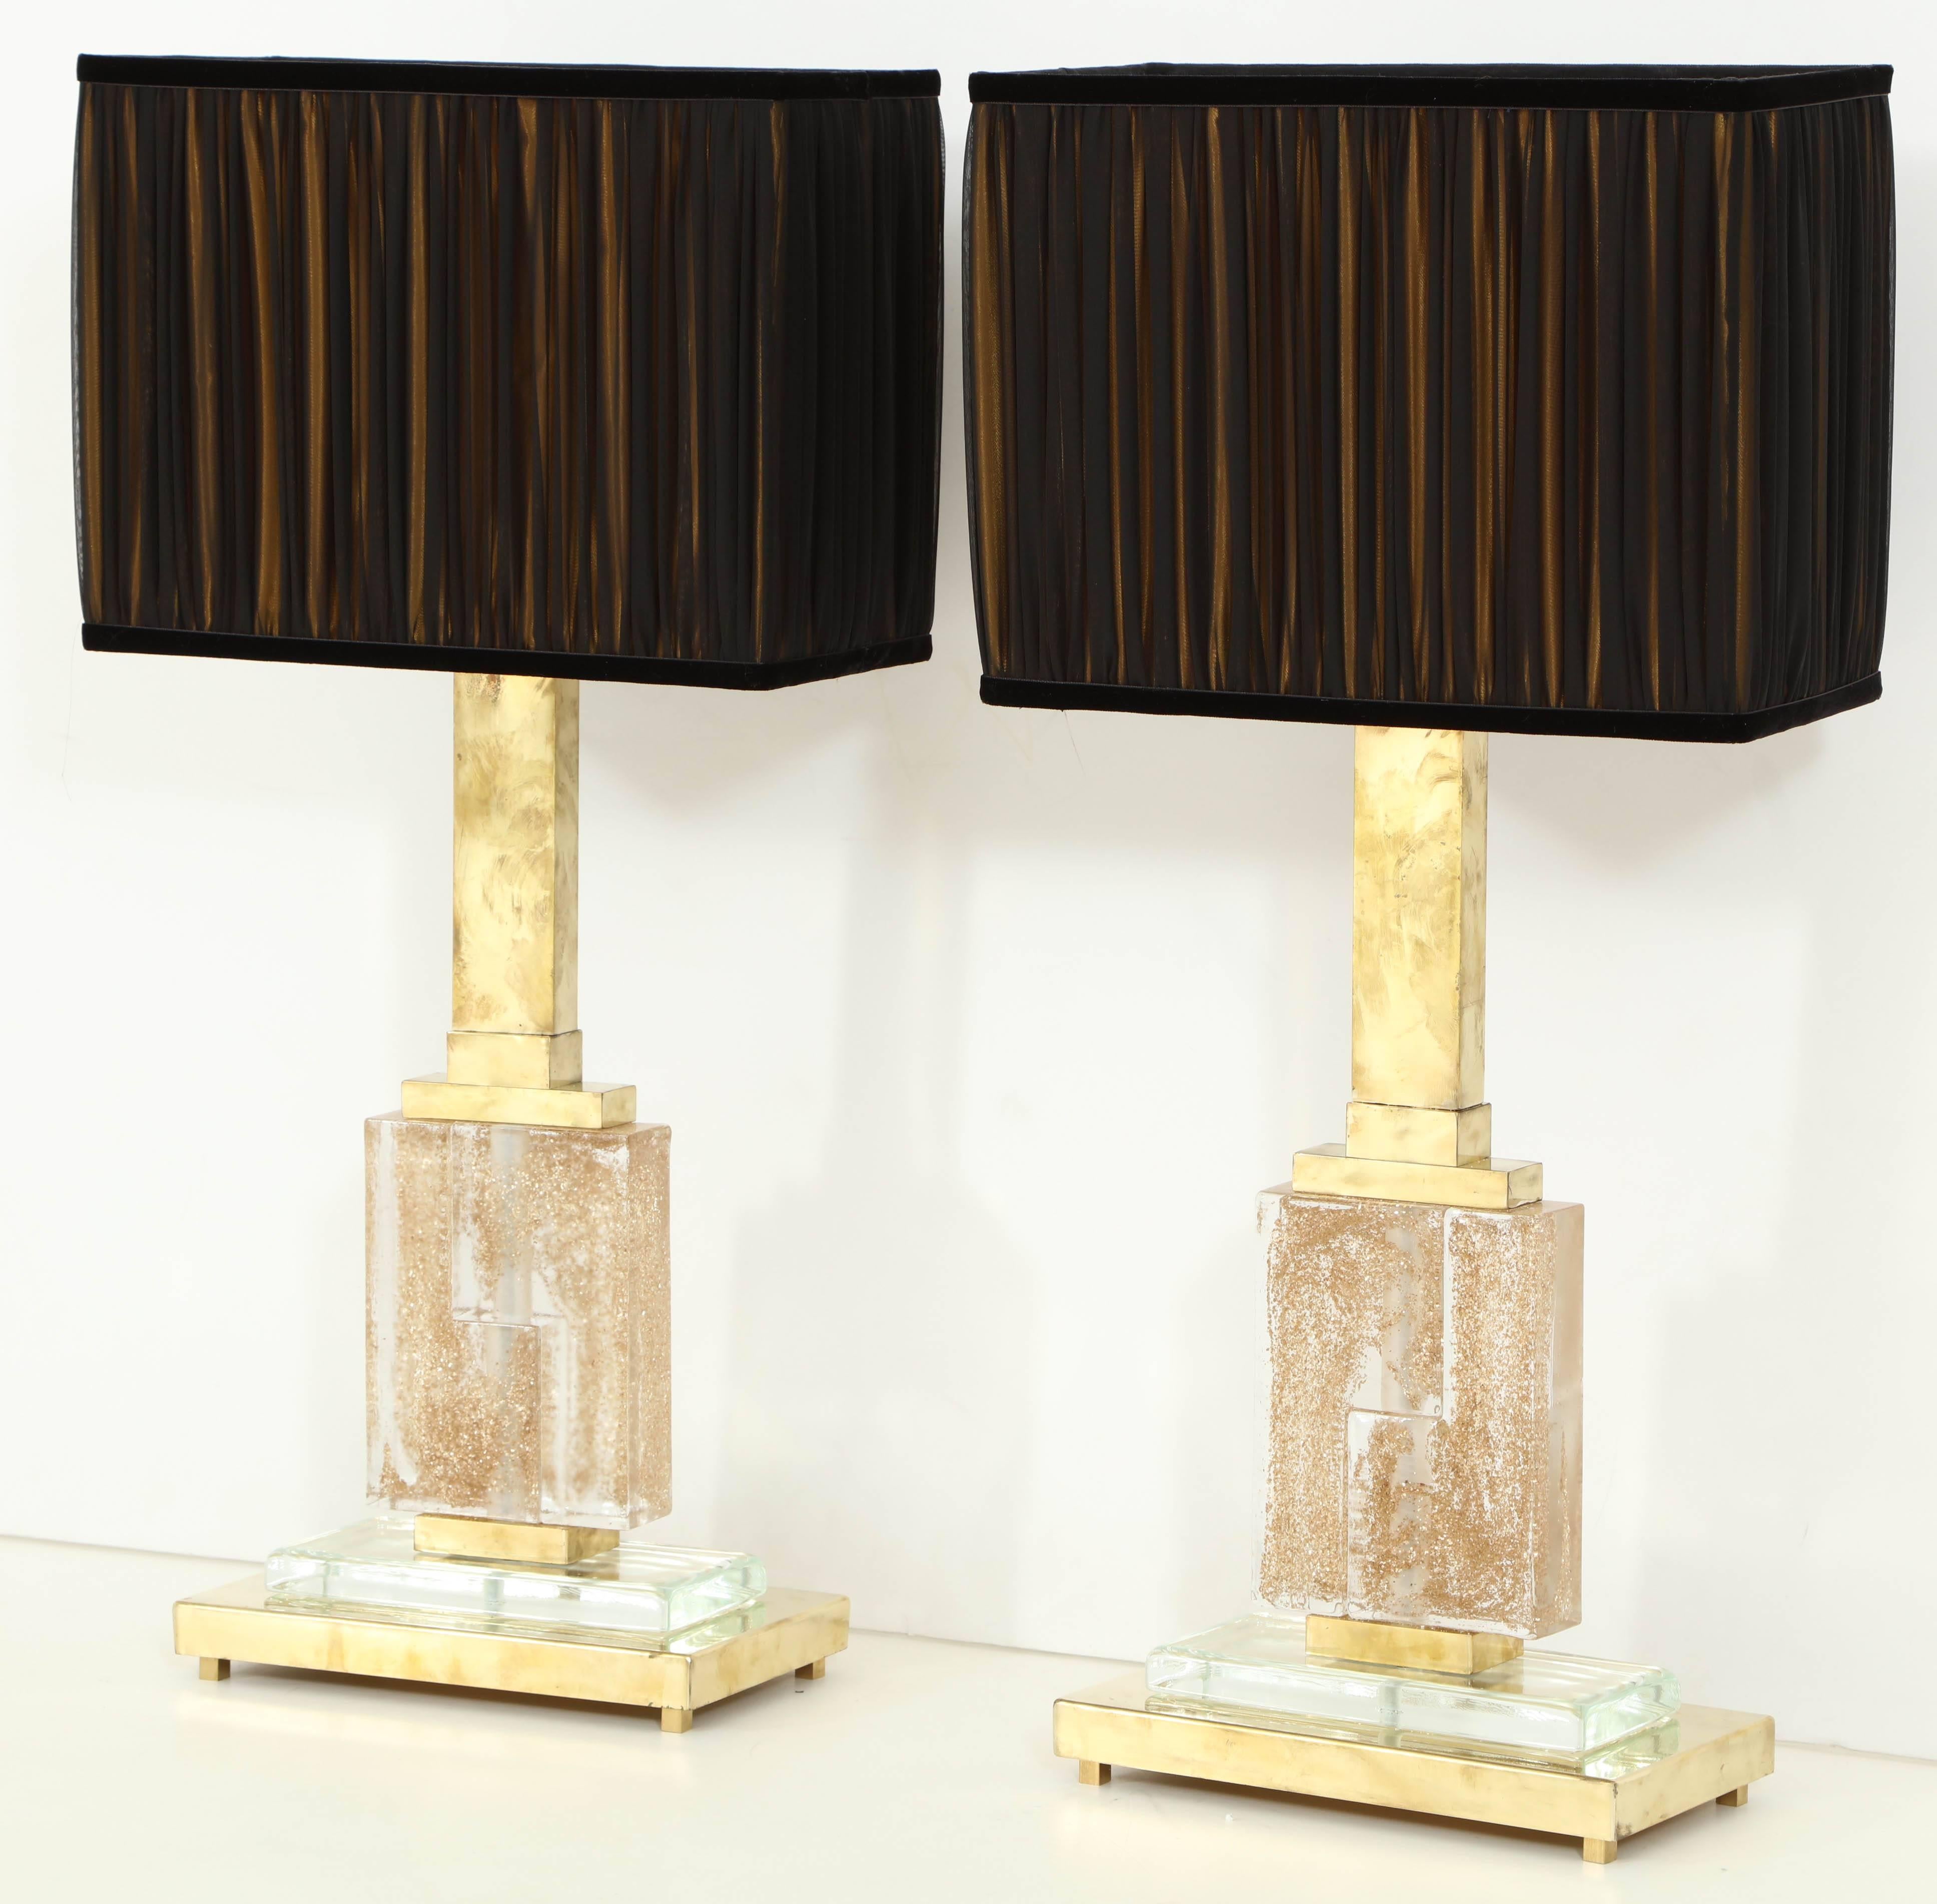 Exquisite craftsmanship and composition make these vintage Italian lamps a true work of art. Handblown in clear Murano glass with infused gold sparkles and brass base, each lamp stands 33 5/8